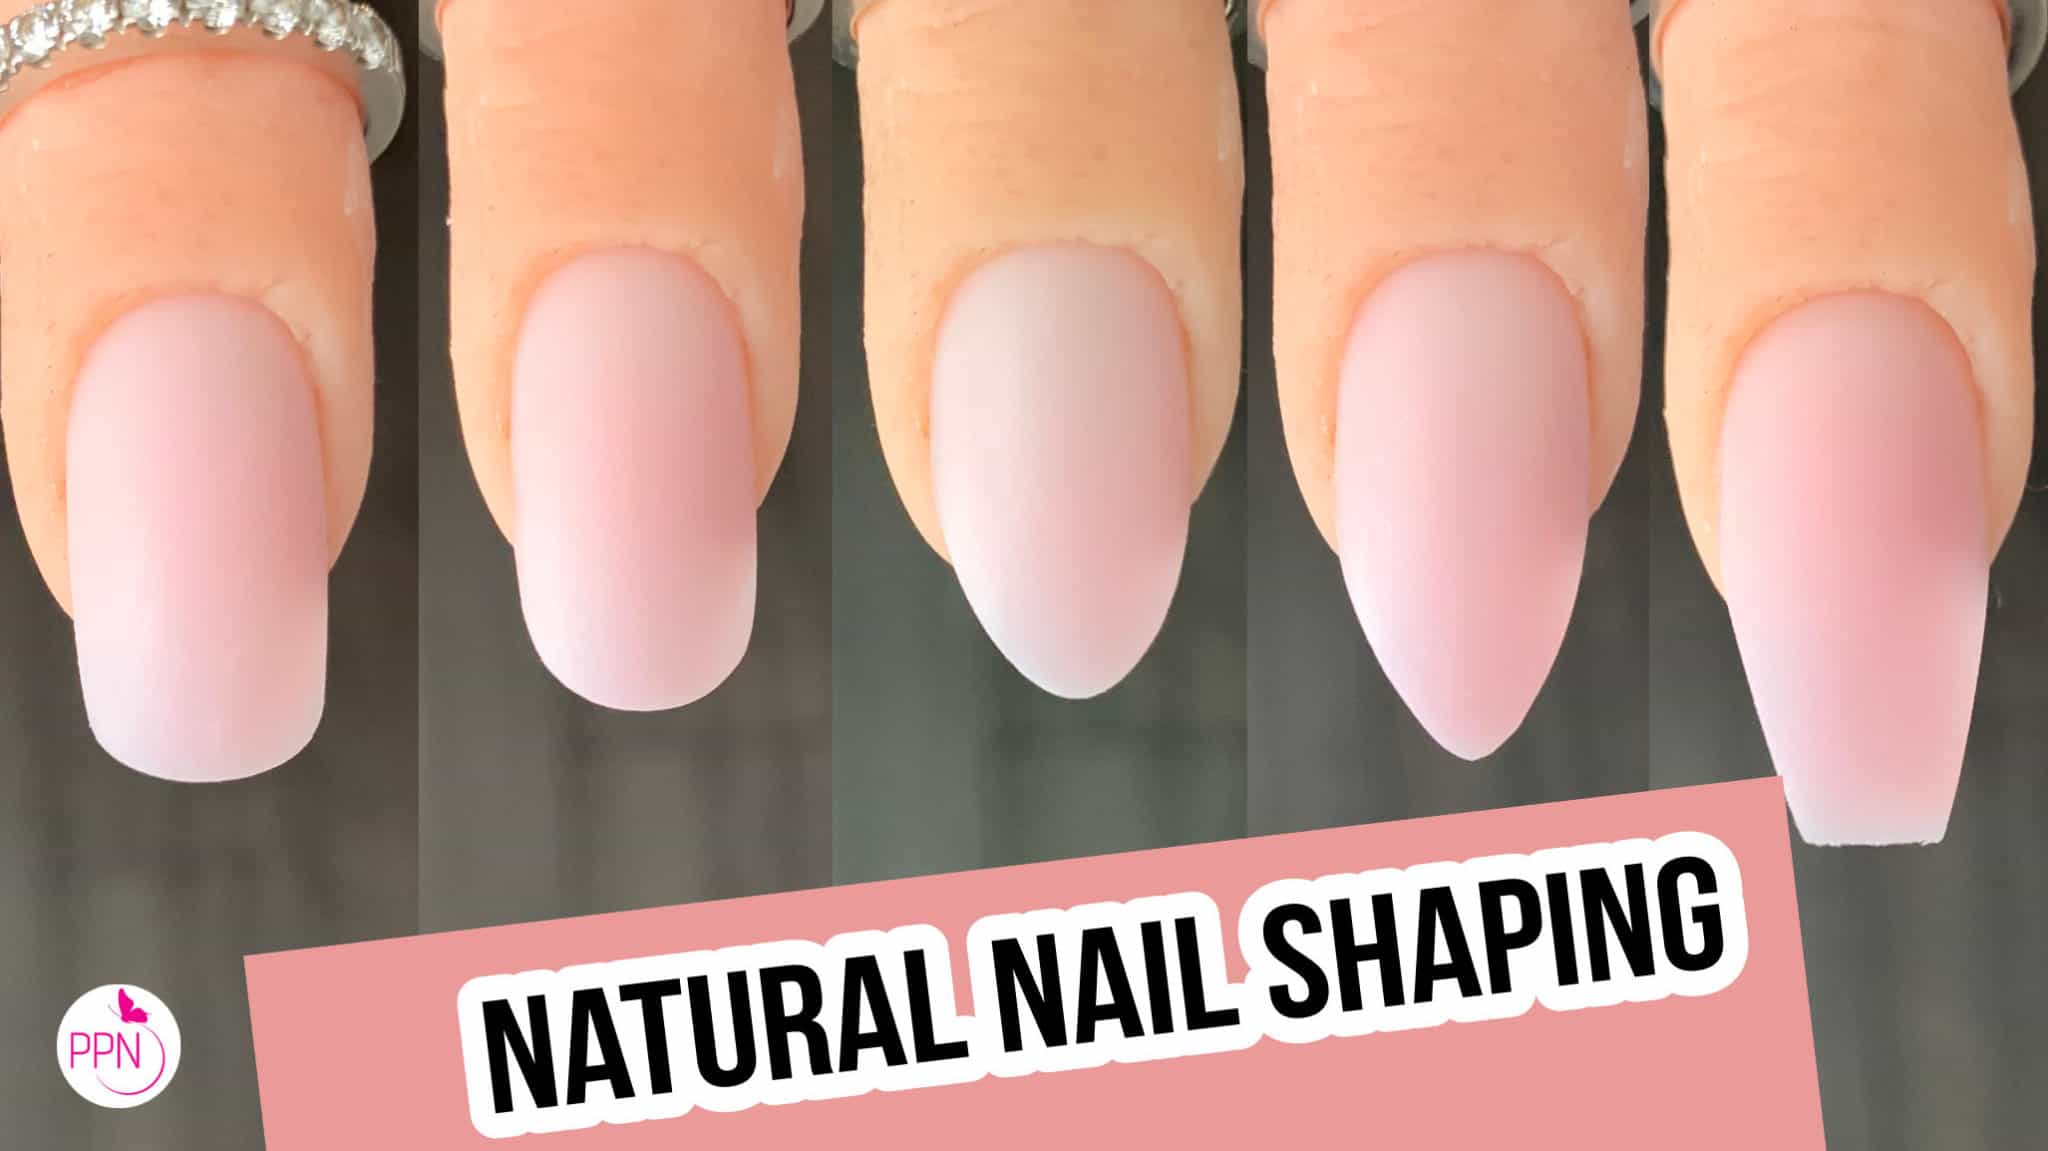 6. Oval nails vs. almond nails: which is right for you? - wide 5